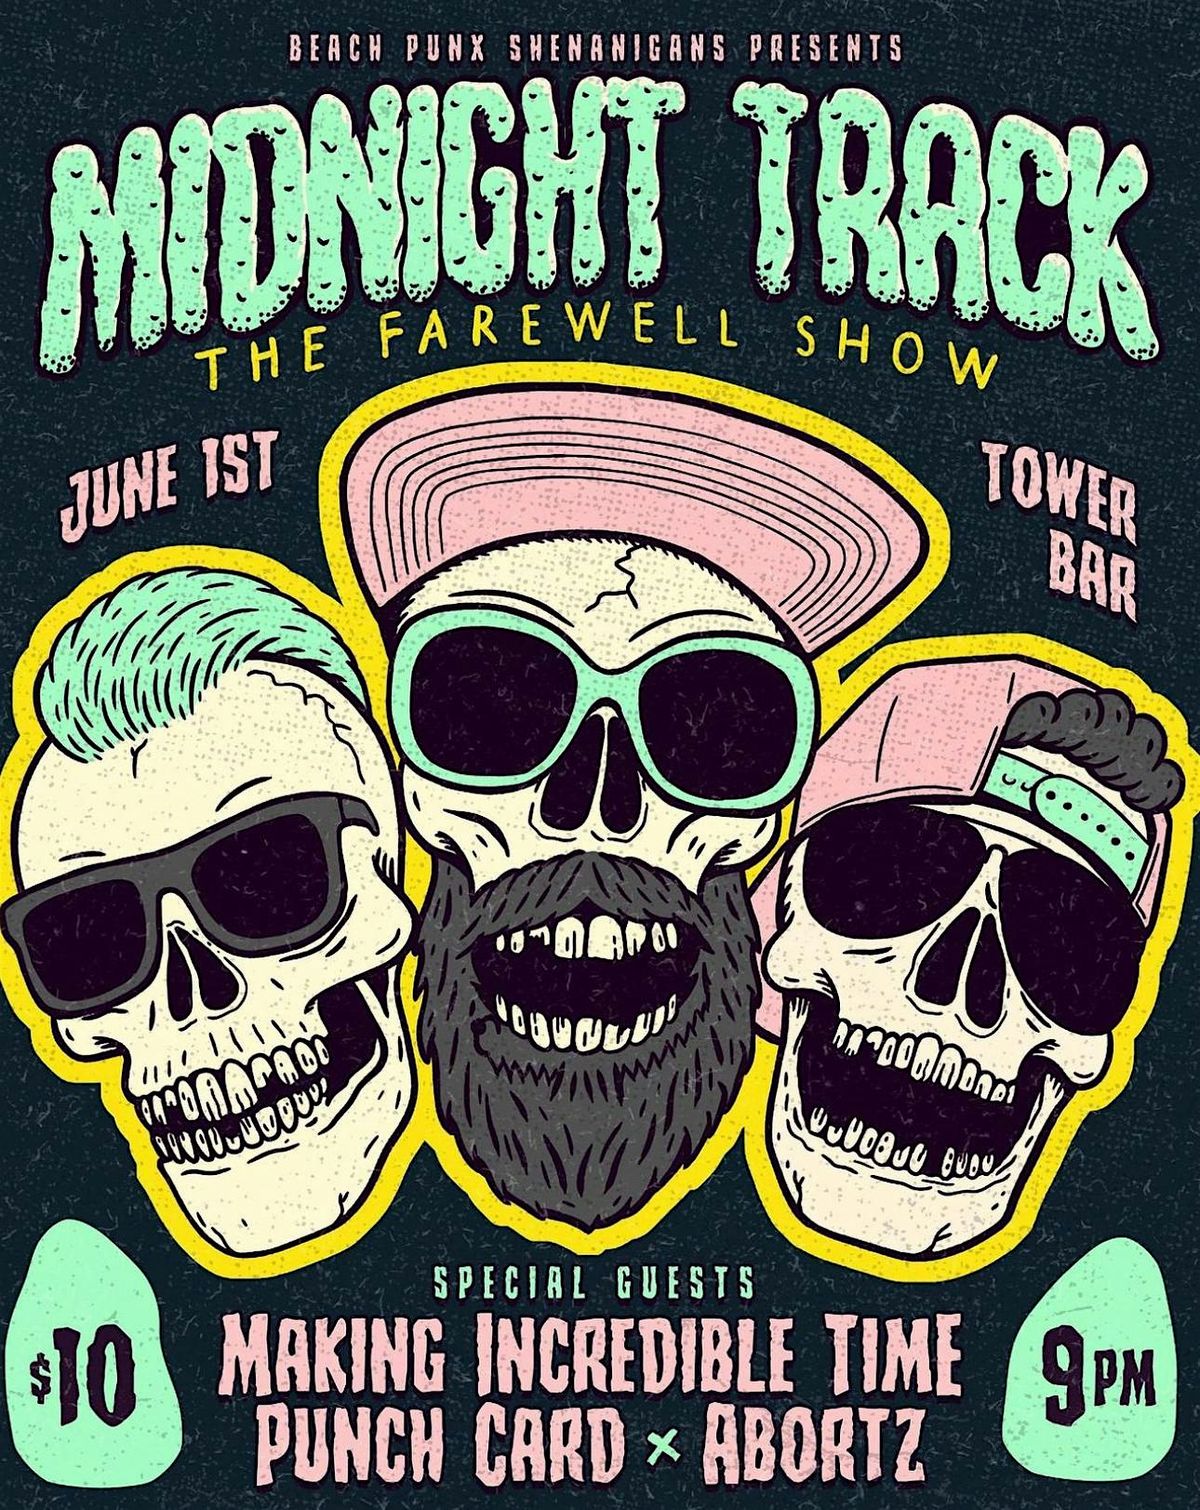 Midnight Track Farewell Show with MIT, PunchCard & The A-Abortz @ The Tower